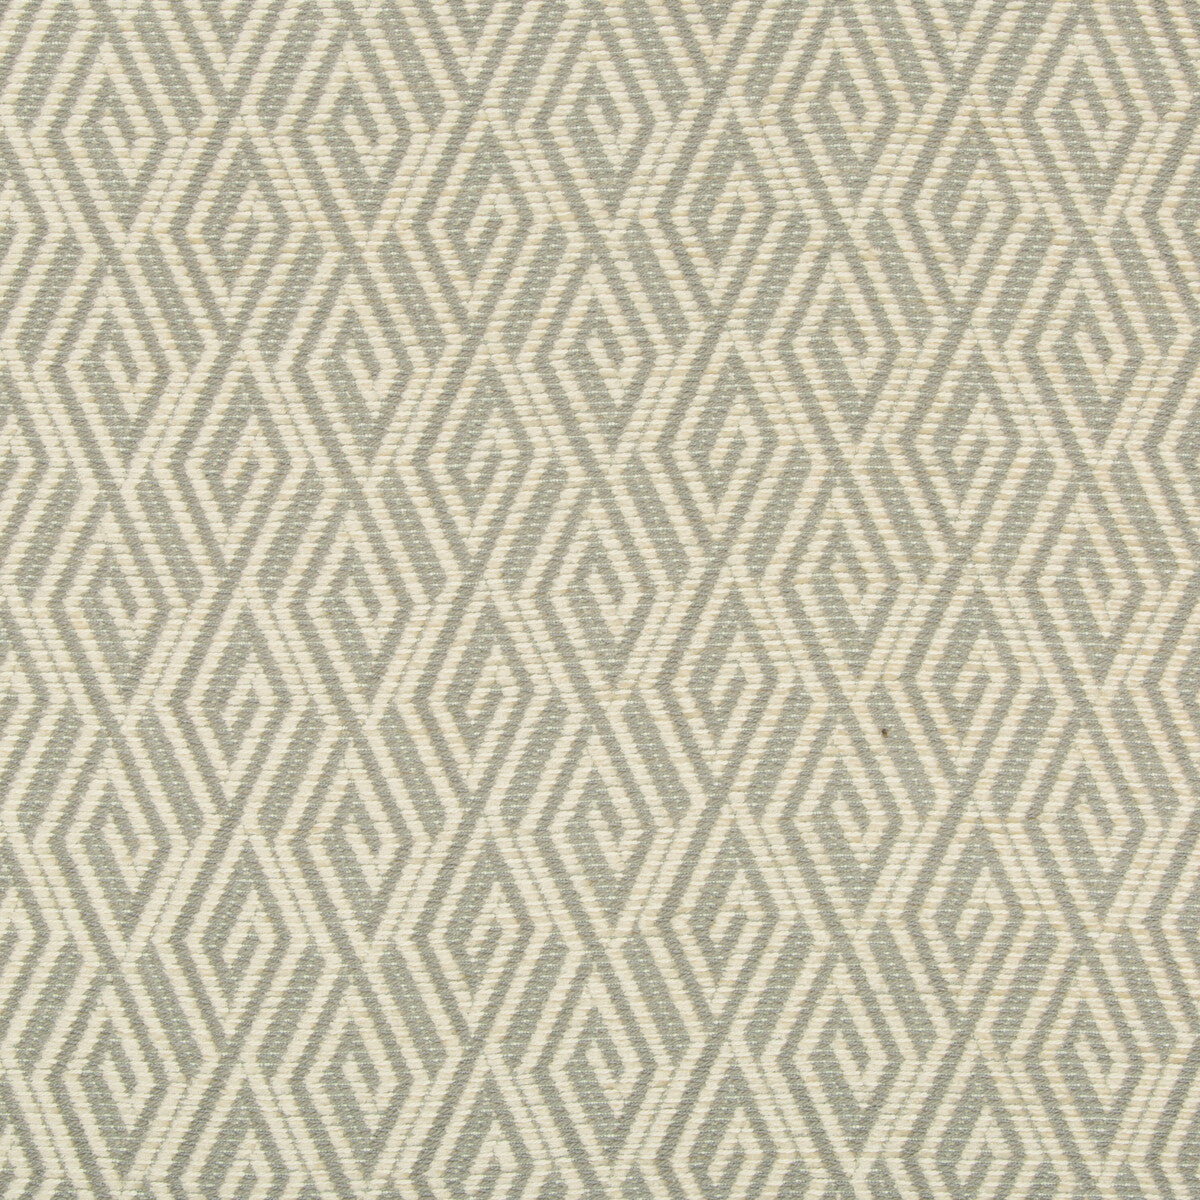 Kravet Design fabric in 34972-11 color - pattern 34972.11.0 - by Kravet Design in the Performance Crypton Home collection